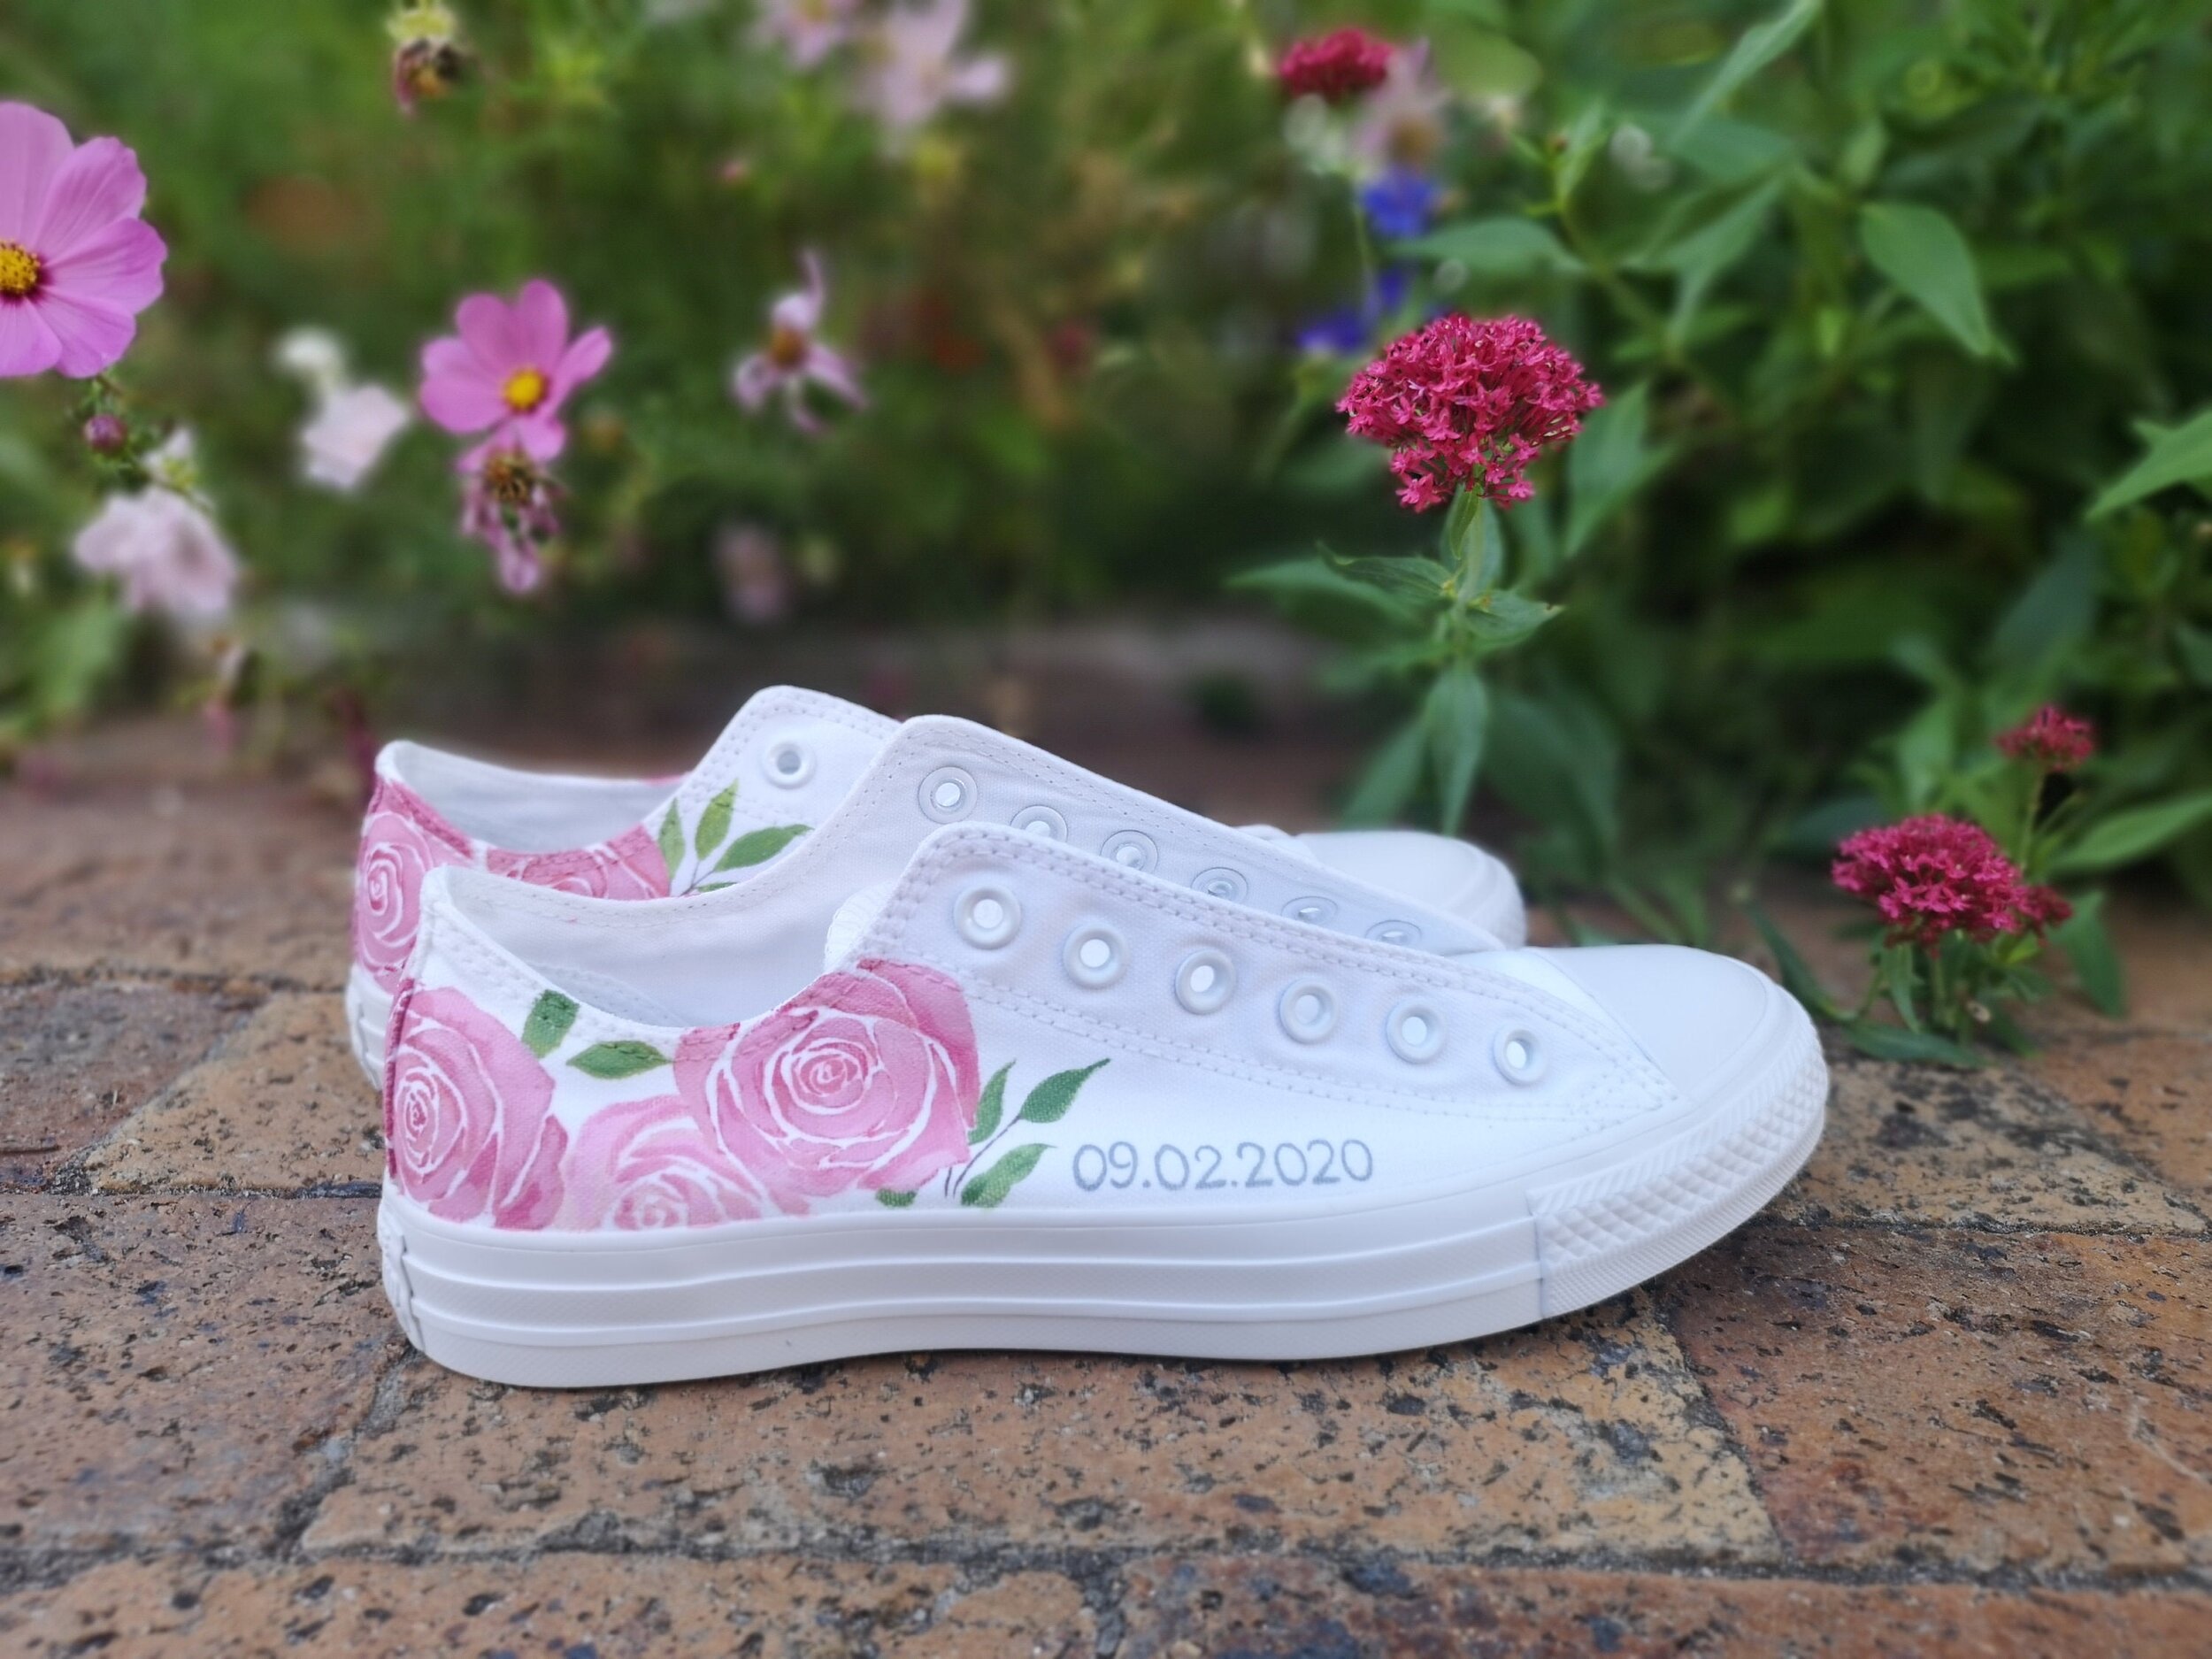 Custom Converse, Hand Painted Shoes, Painted Converse, Shoes, Wedding Converse, Painting Only | islamiyyat.com